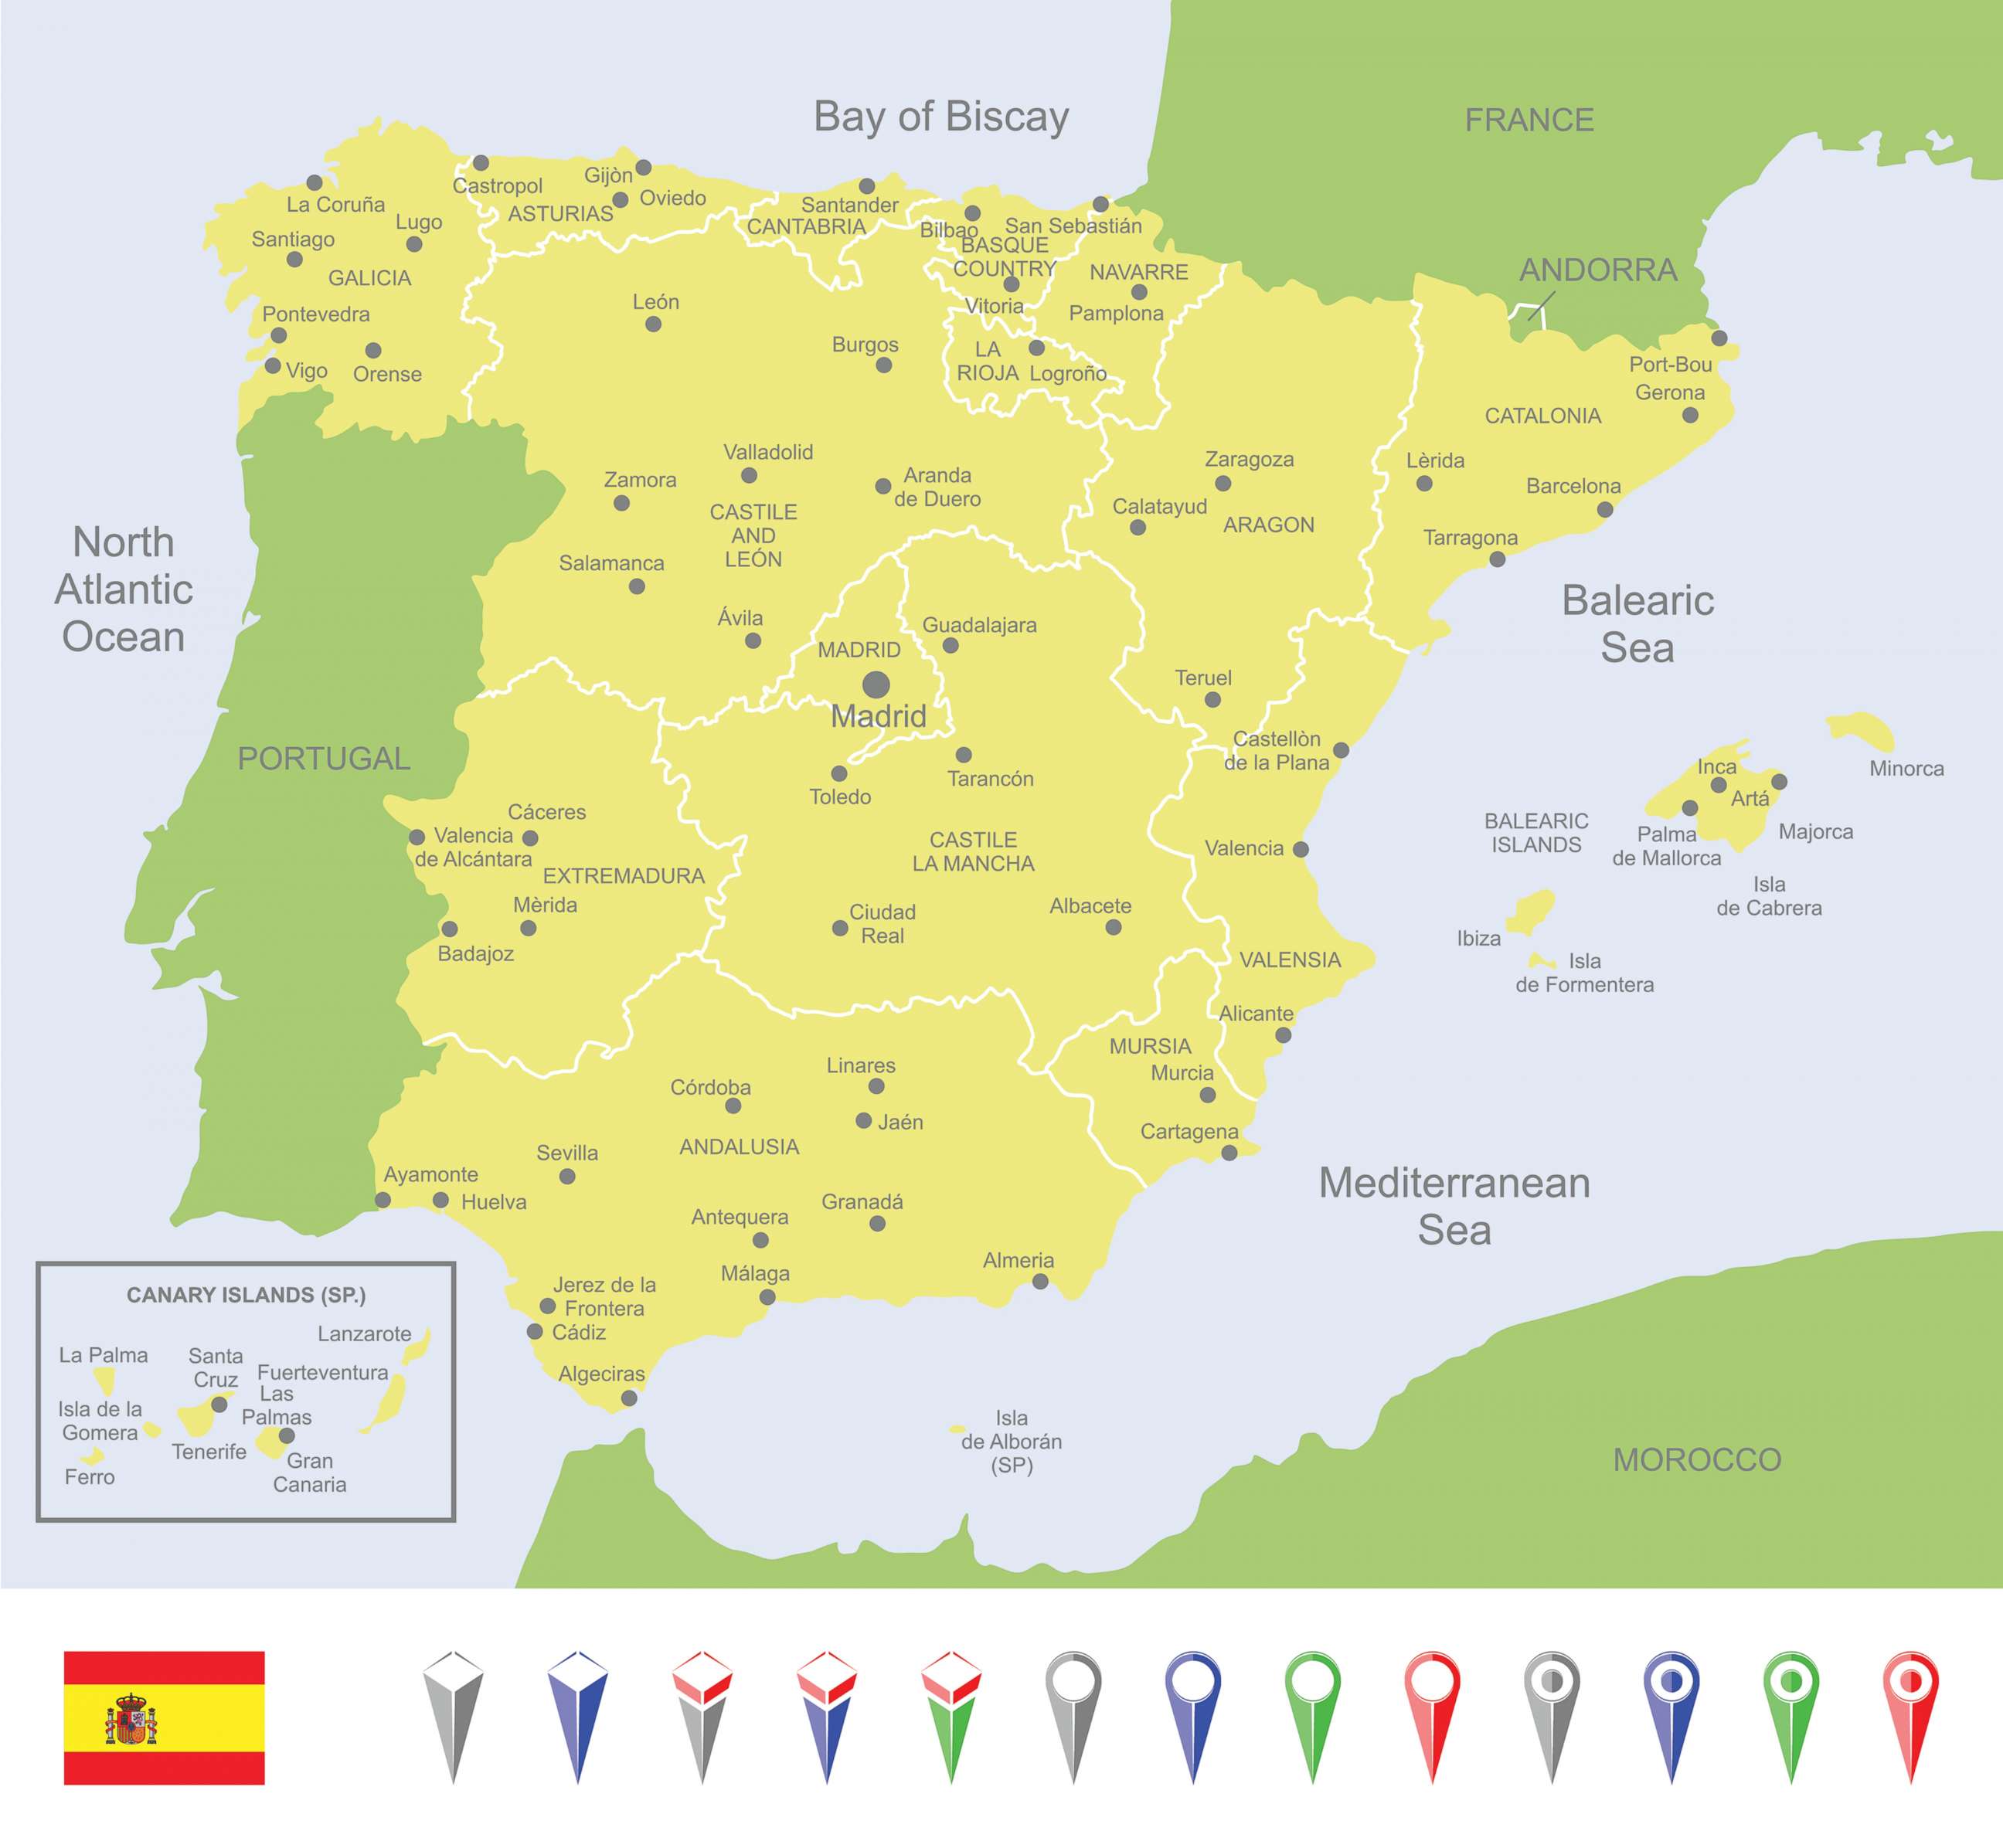 PHOTO: Detailed map of Spain showing Catalonia.